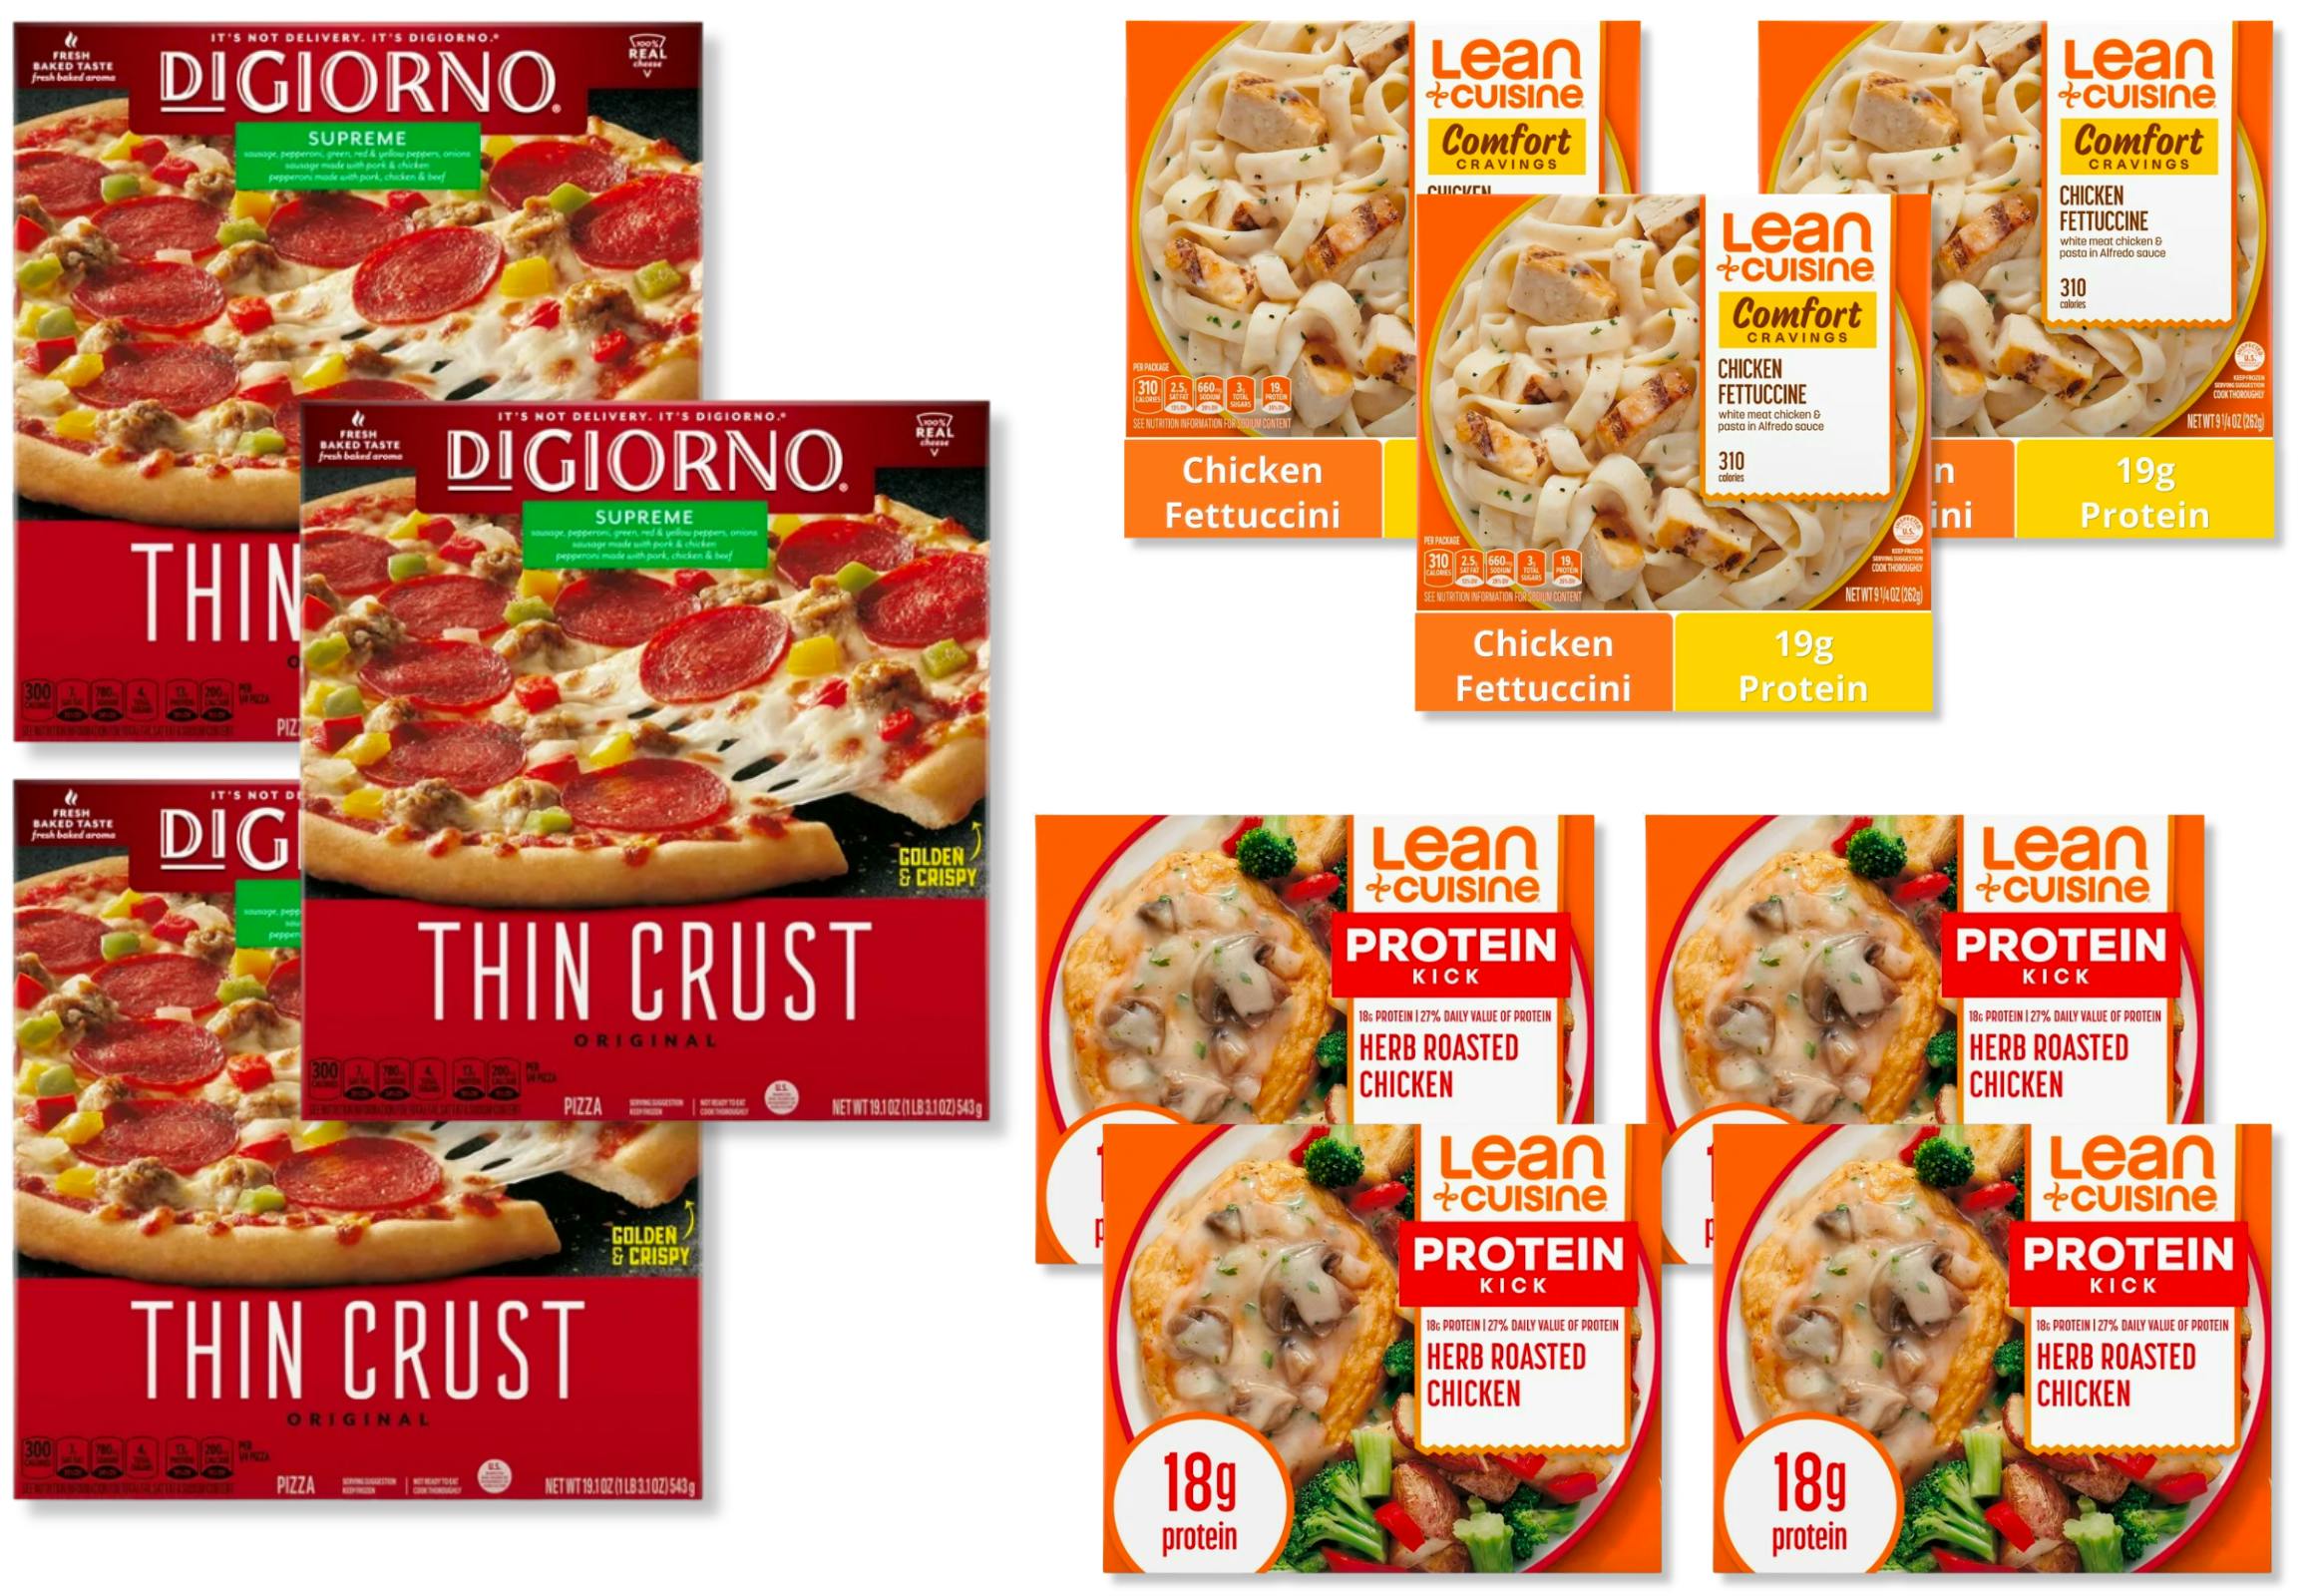 https://content-images.thekrazycouponlady.com/nie44ndm9bqr/53QP7IOConKO10x6k7Ay8M/4a6541c18ff616fe66dc896af7397670/digiorno_lean_cuisine.png